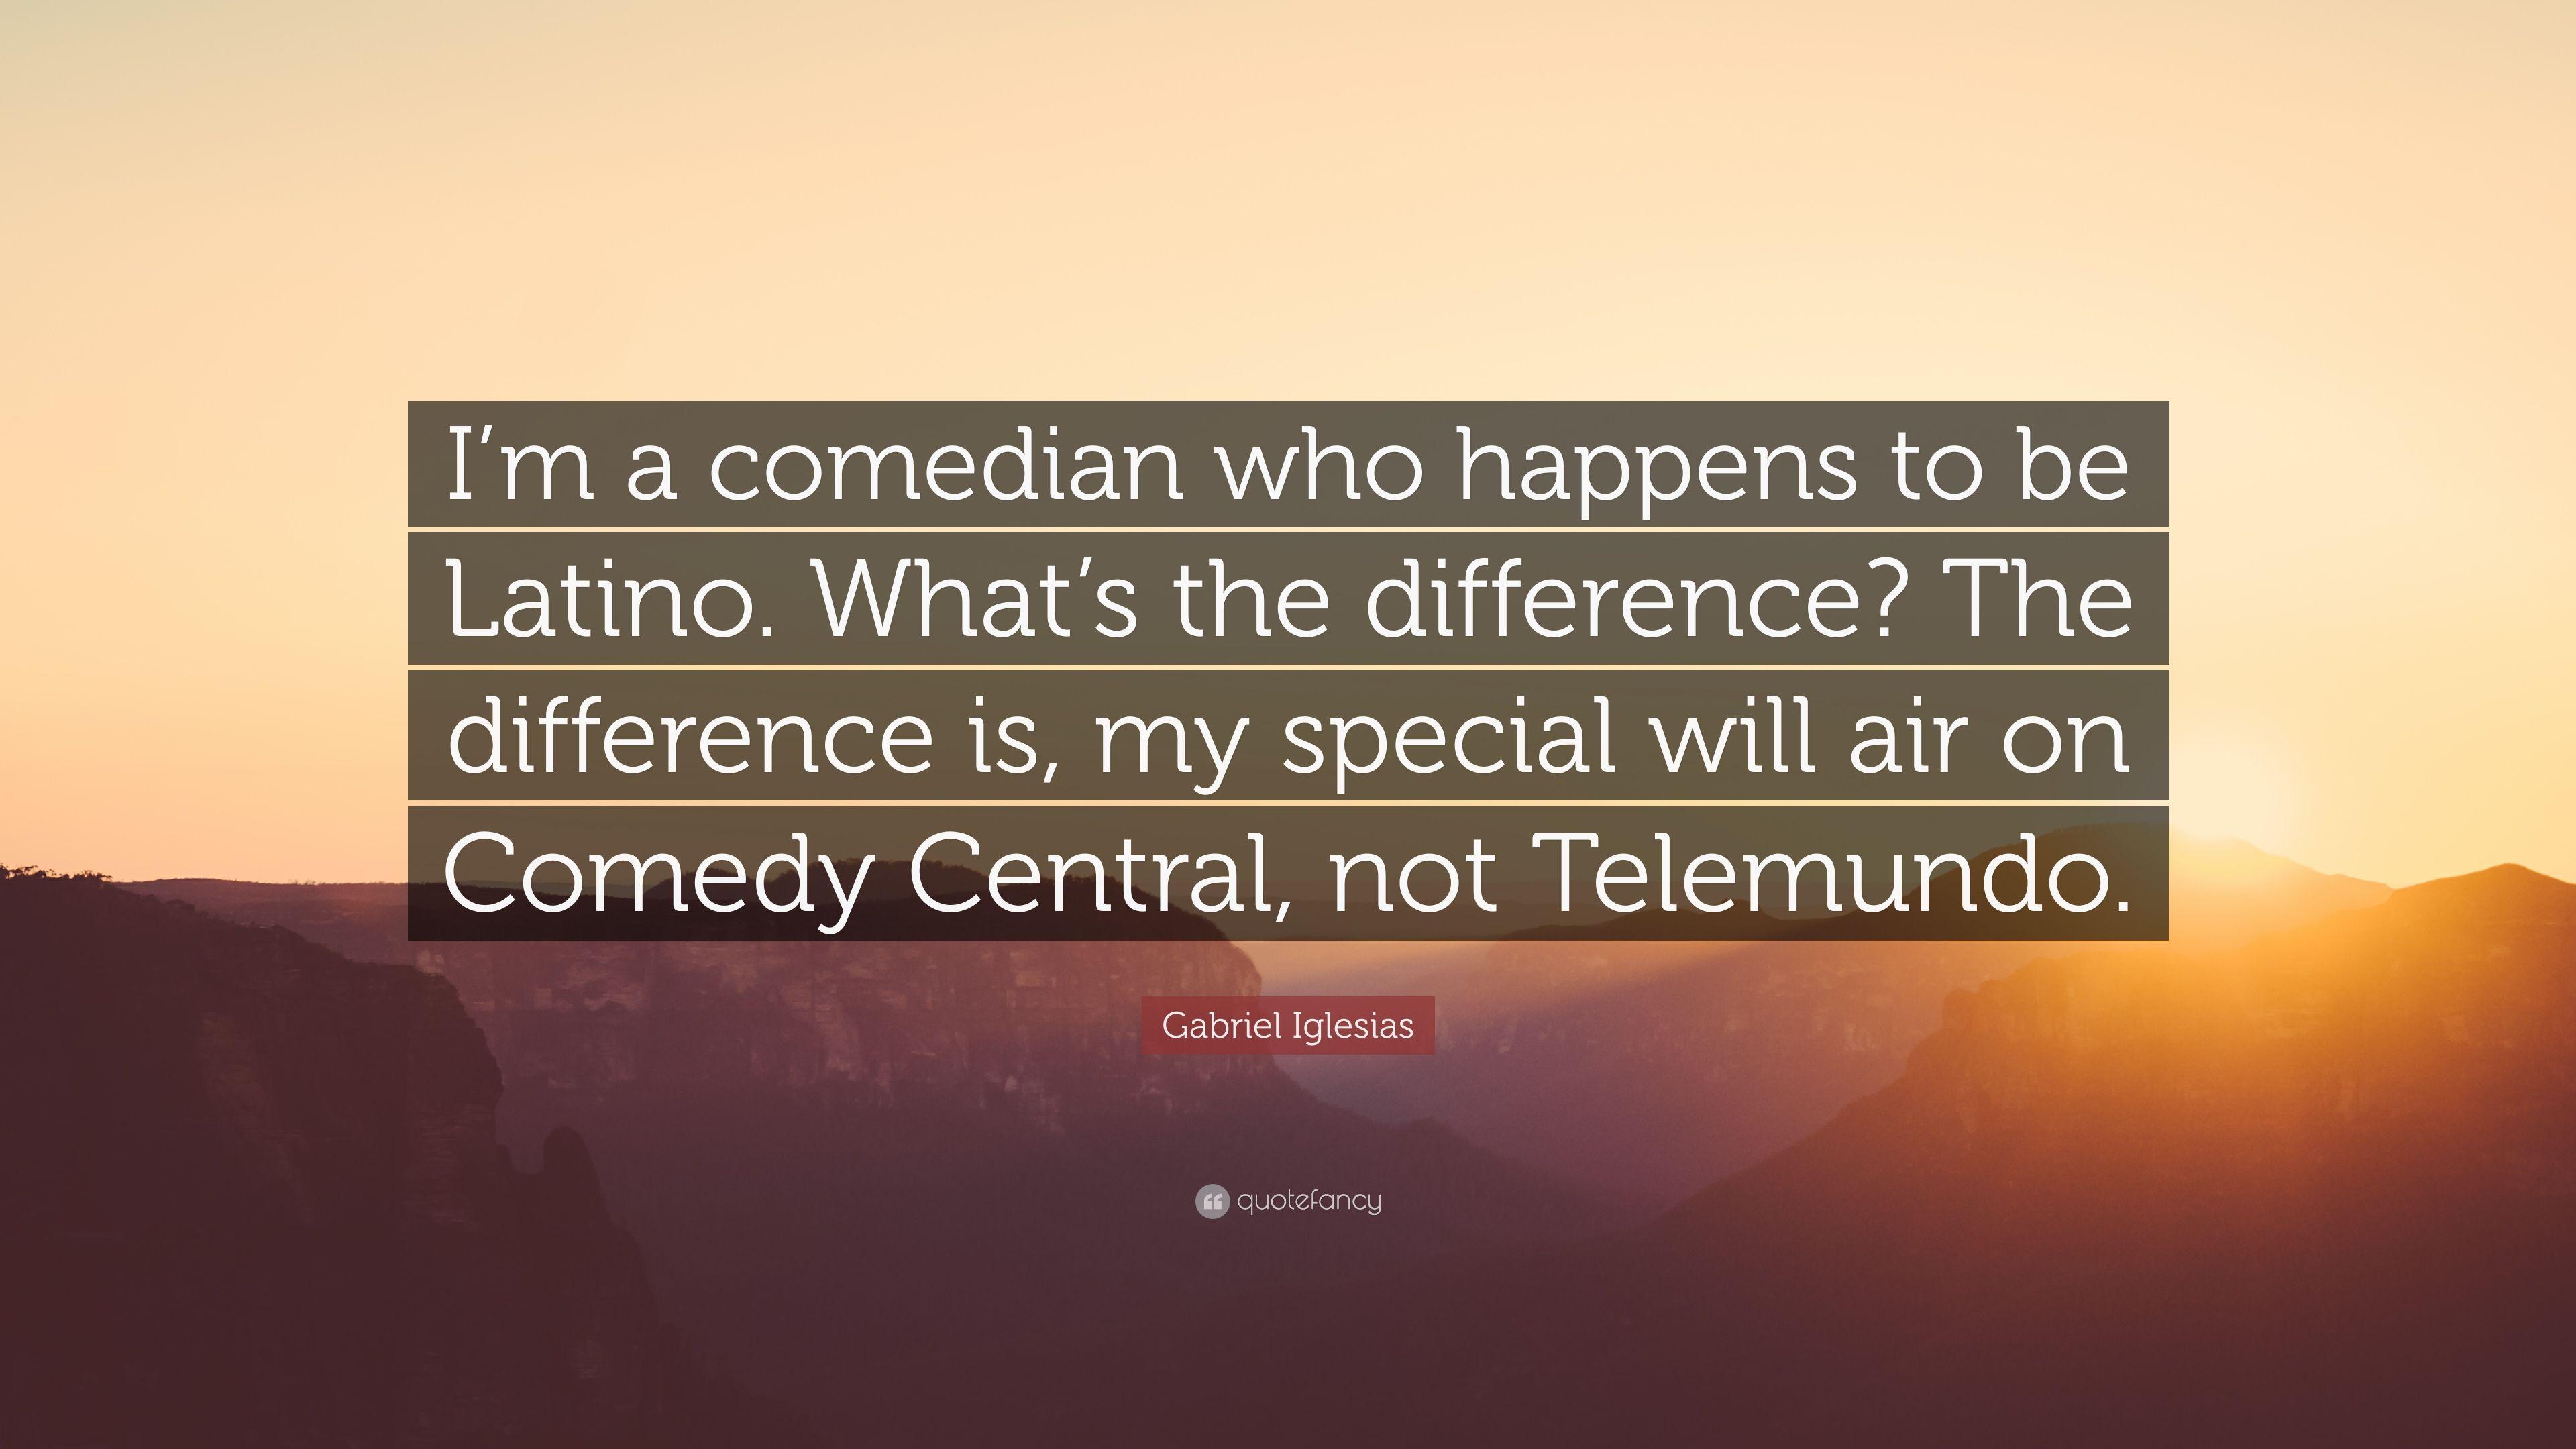 Gabriel Iglesias Quote: "I'm a comedian who happens to be Latino.